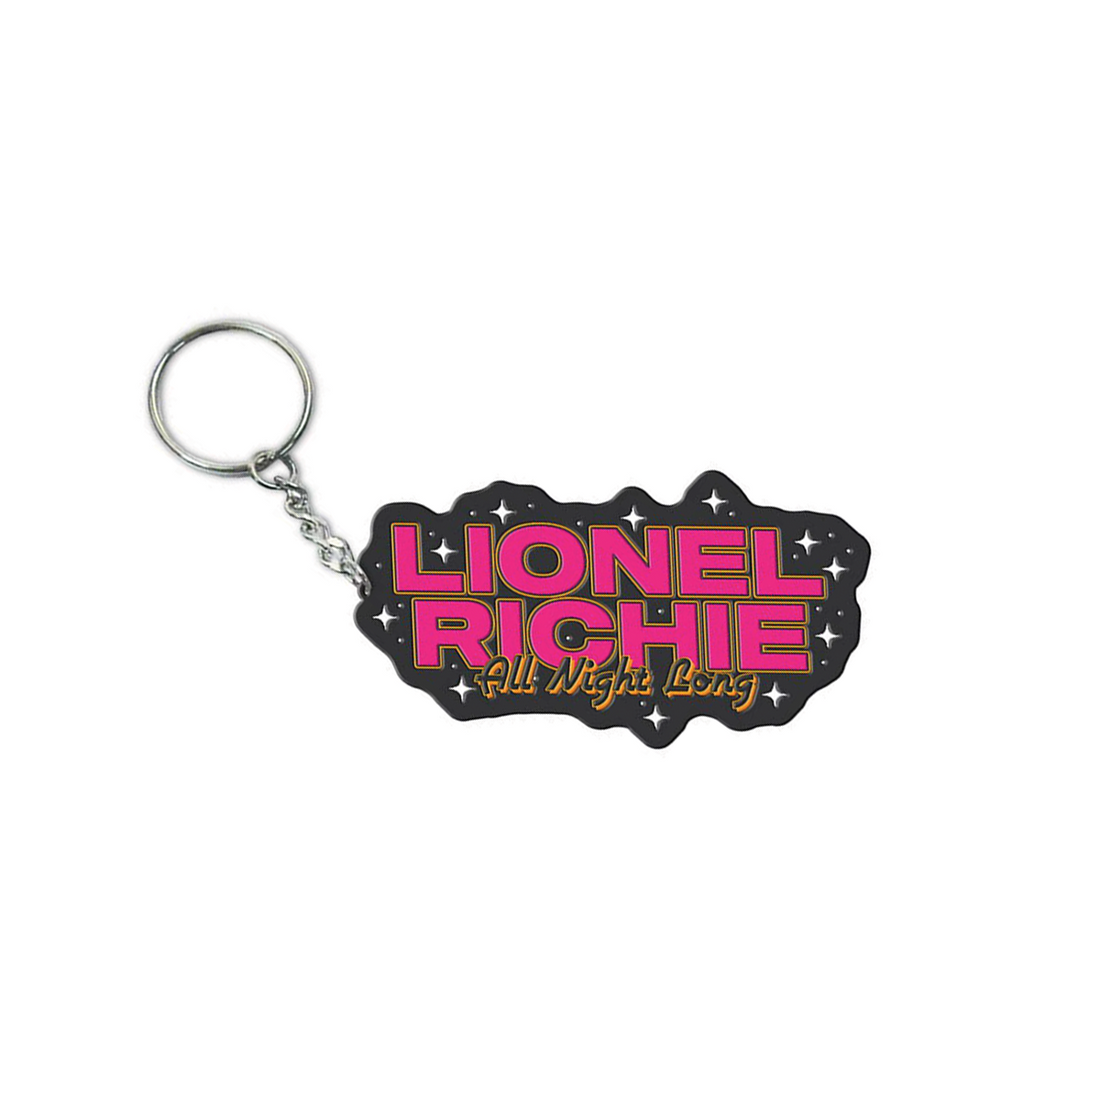 All Night Long Tour Keychain